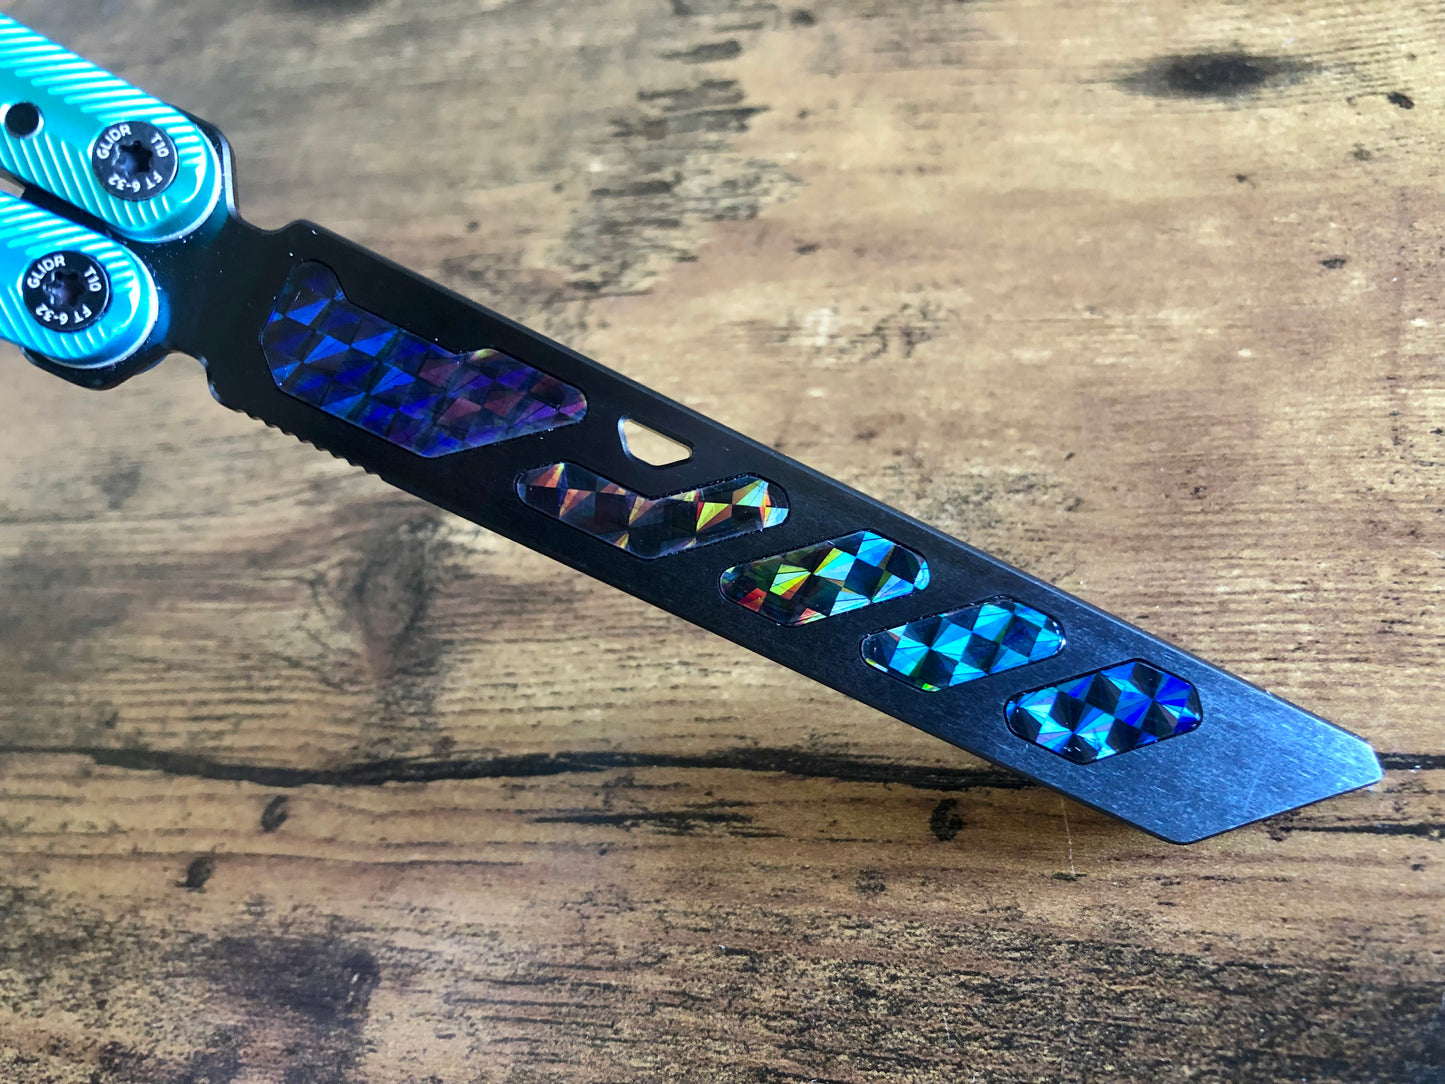 Add a pop of color and a more neutral balance to your Glidr Pacific balisong trainer with these shatter-proof polyurethane Zippy inserts. The inserts increase momentum and can be used to compensate for the added handle weight from the stock Glidr handle weights to maintain your favored balance profile.